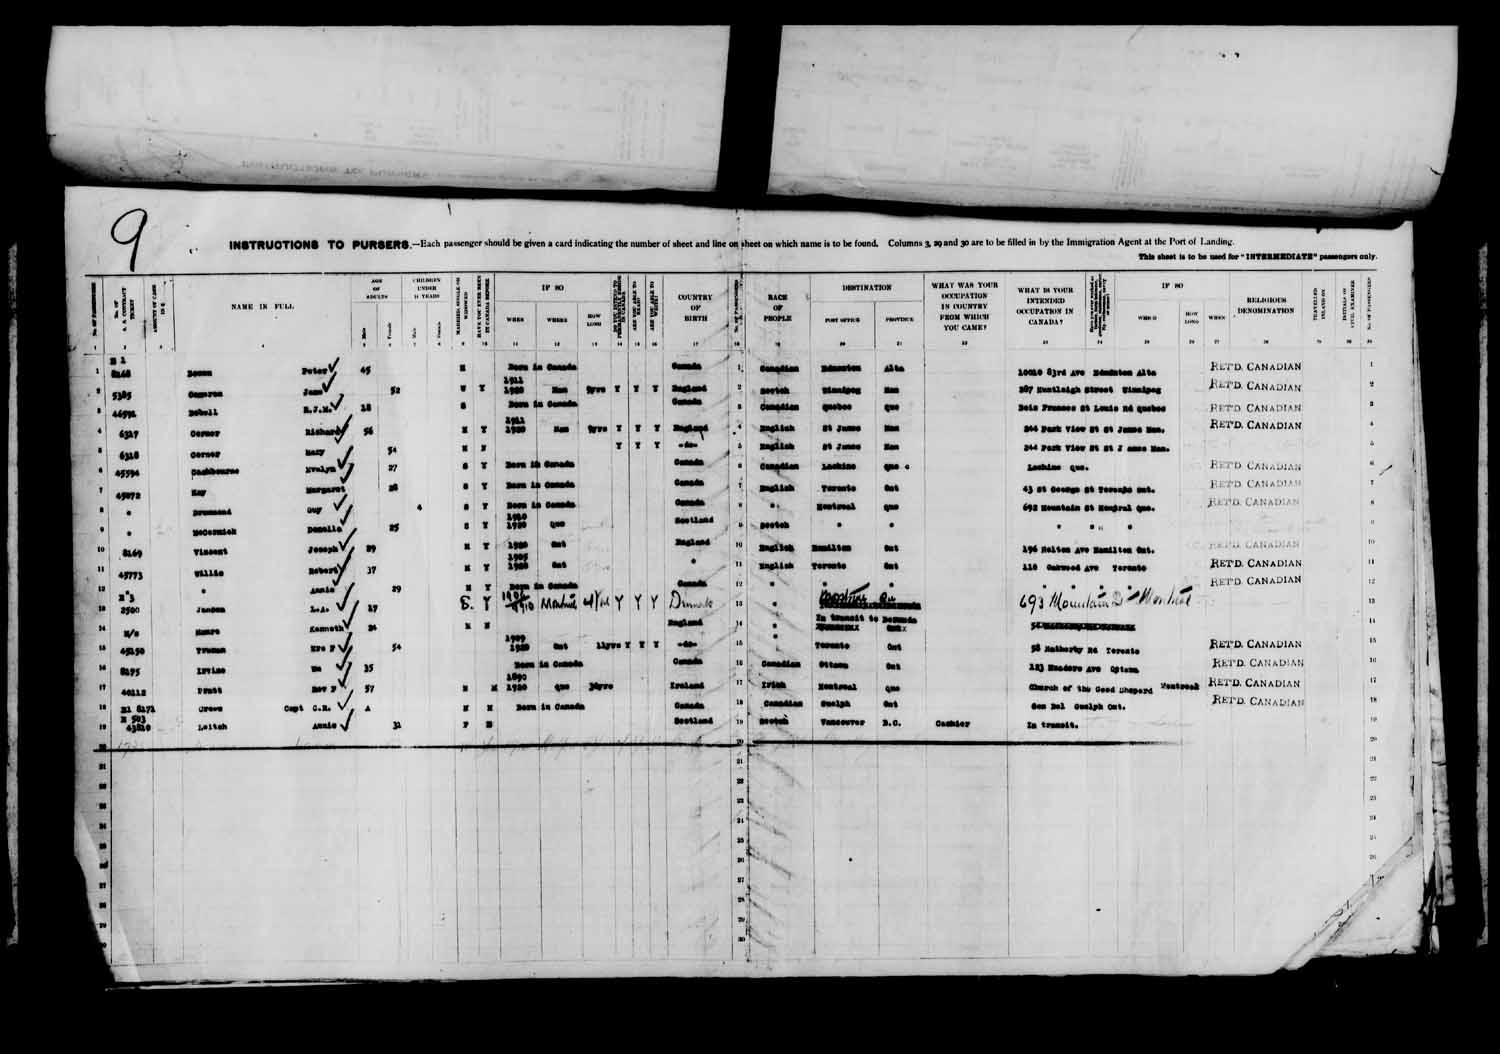 Digitized page of Passenger Lists for Image No.: e003610616